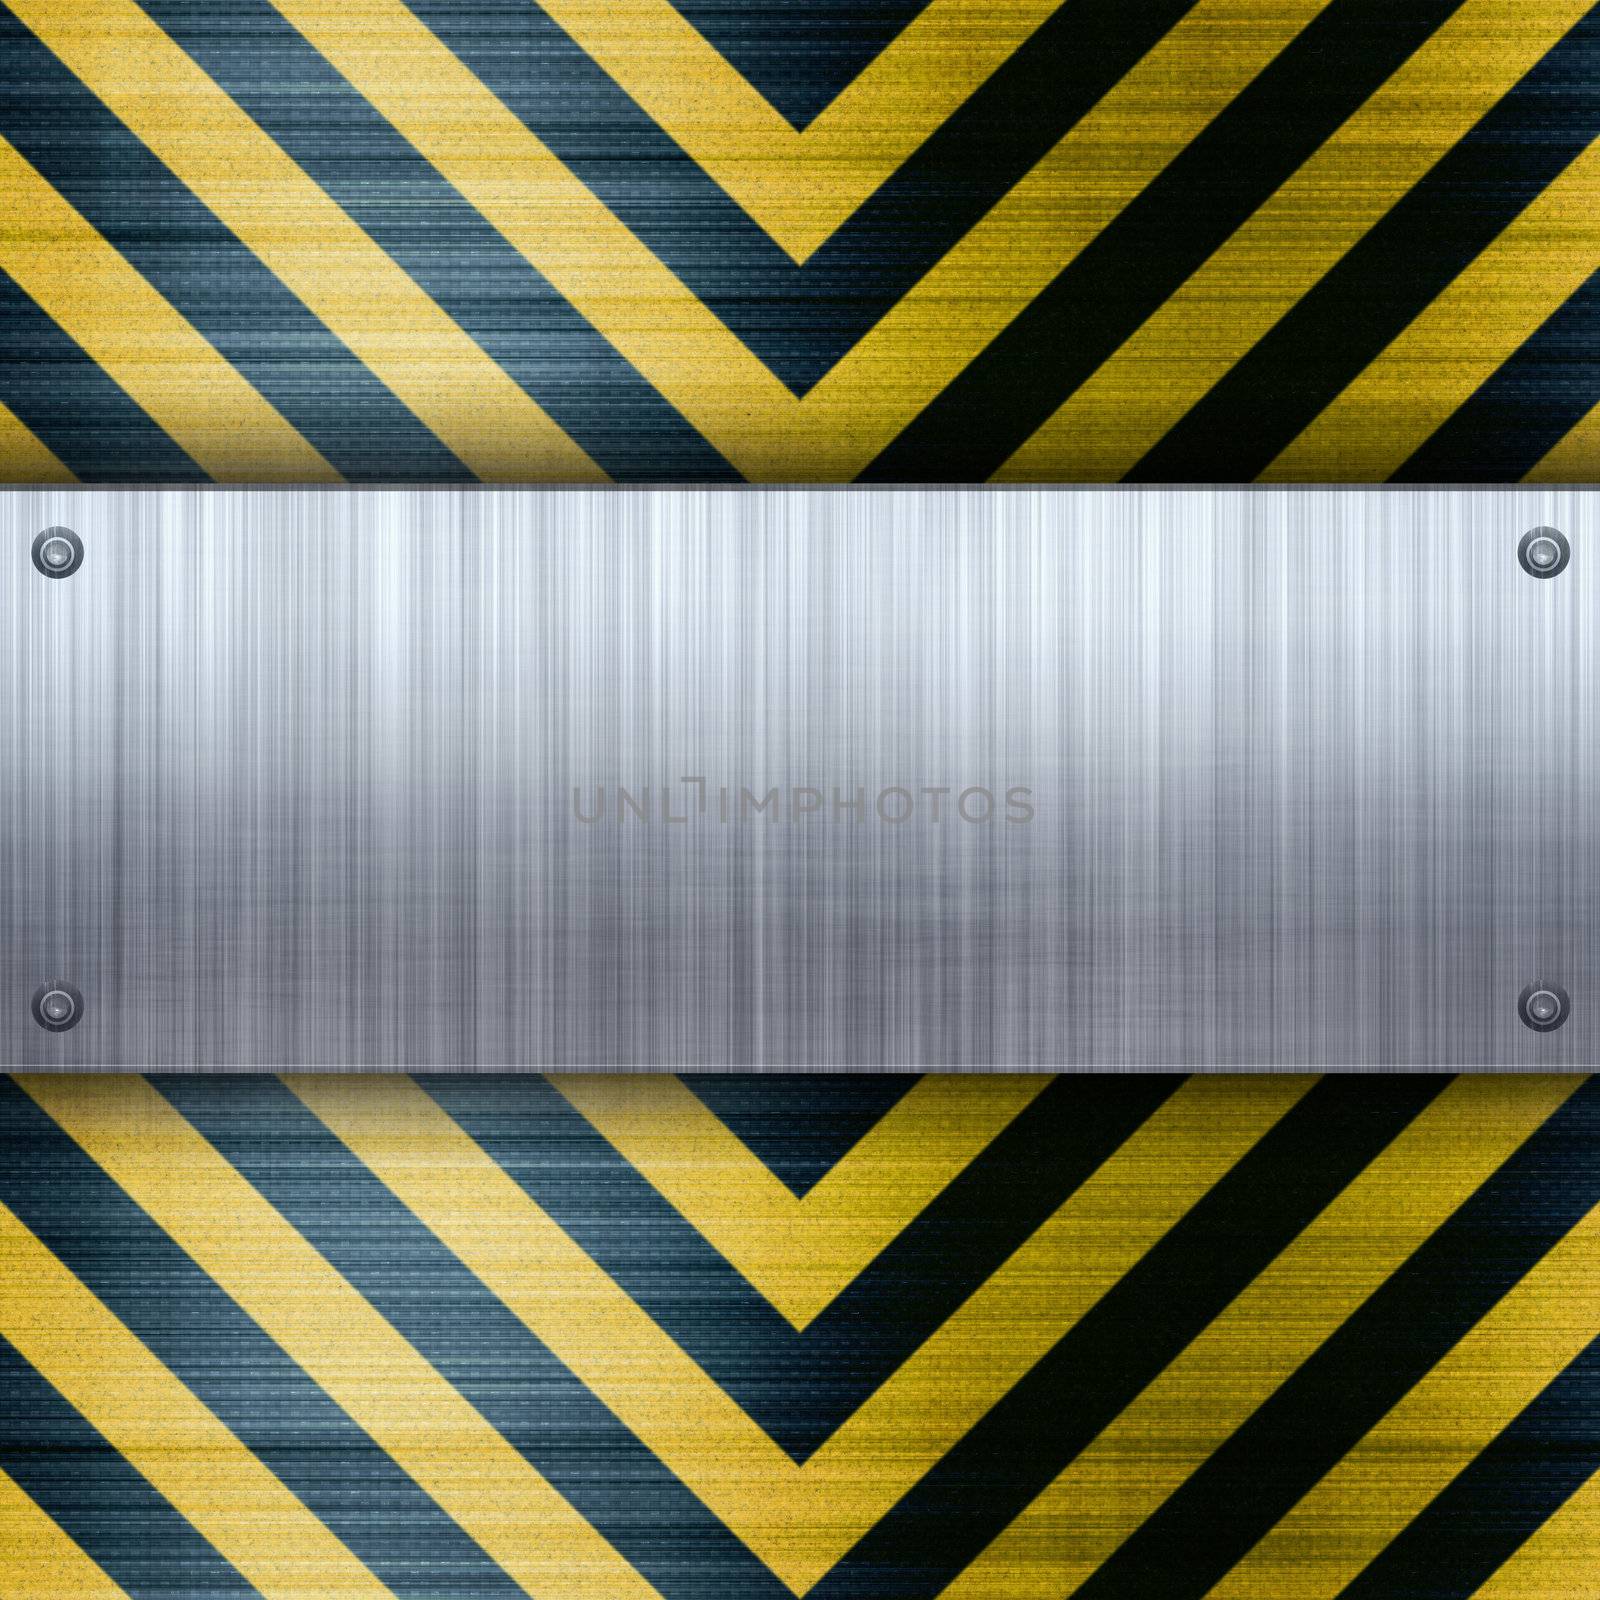 A riveted brushed aluminum plate on a construction hazard stripes background with carbon fiber inlay. 